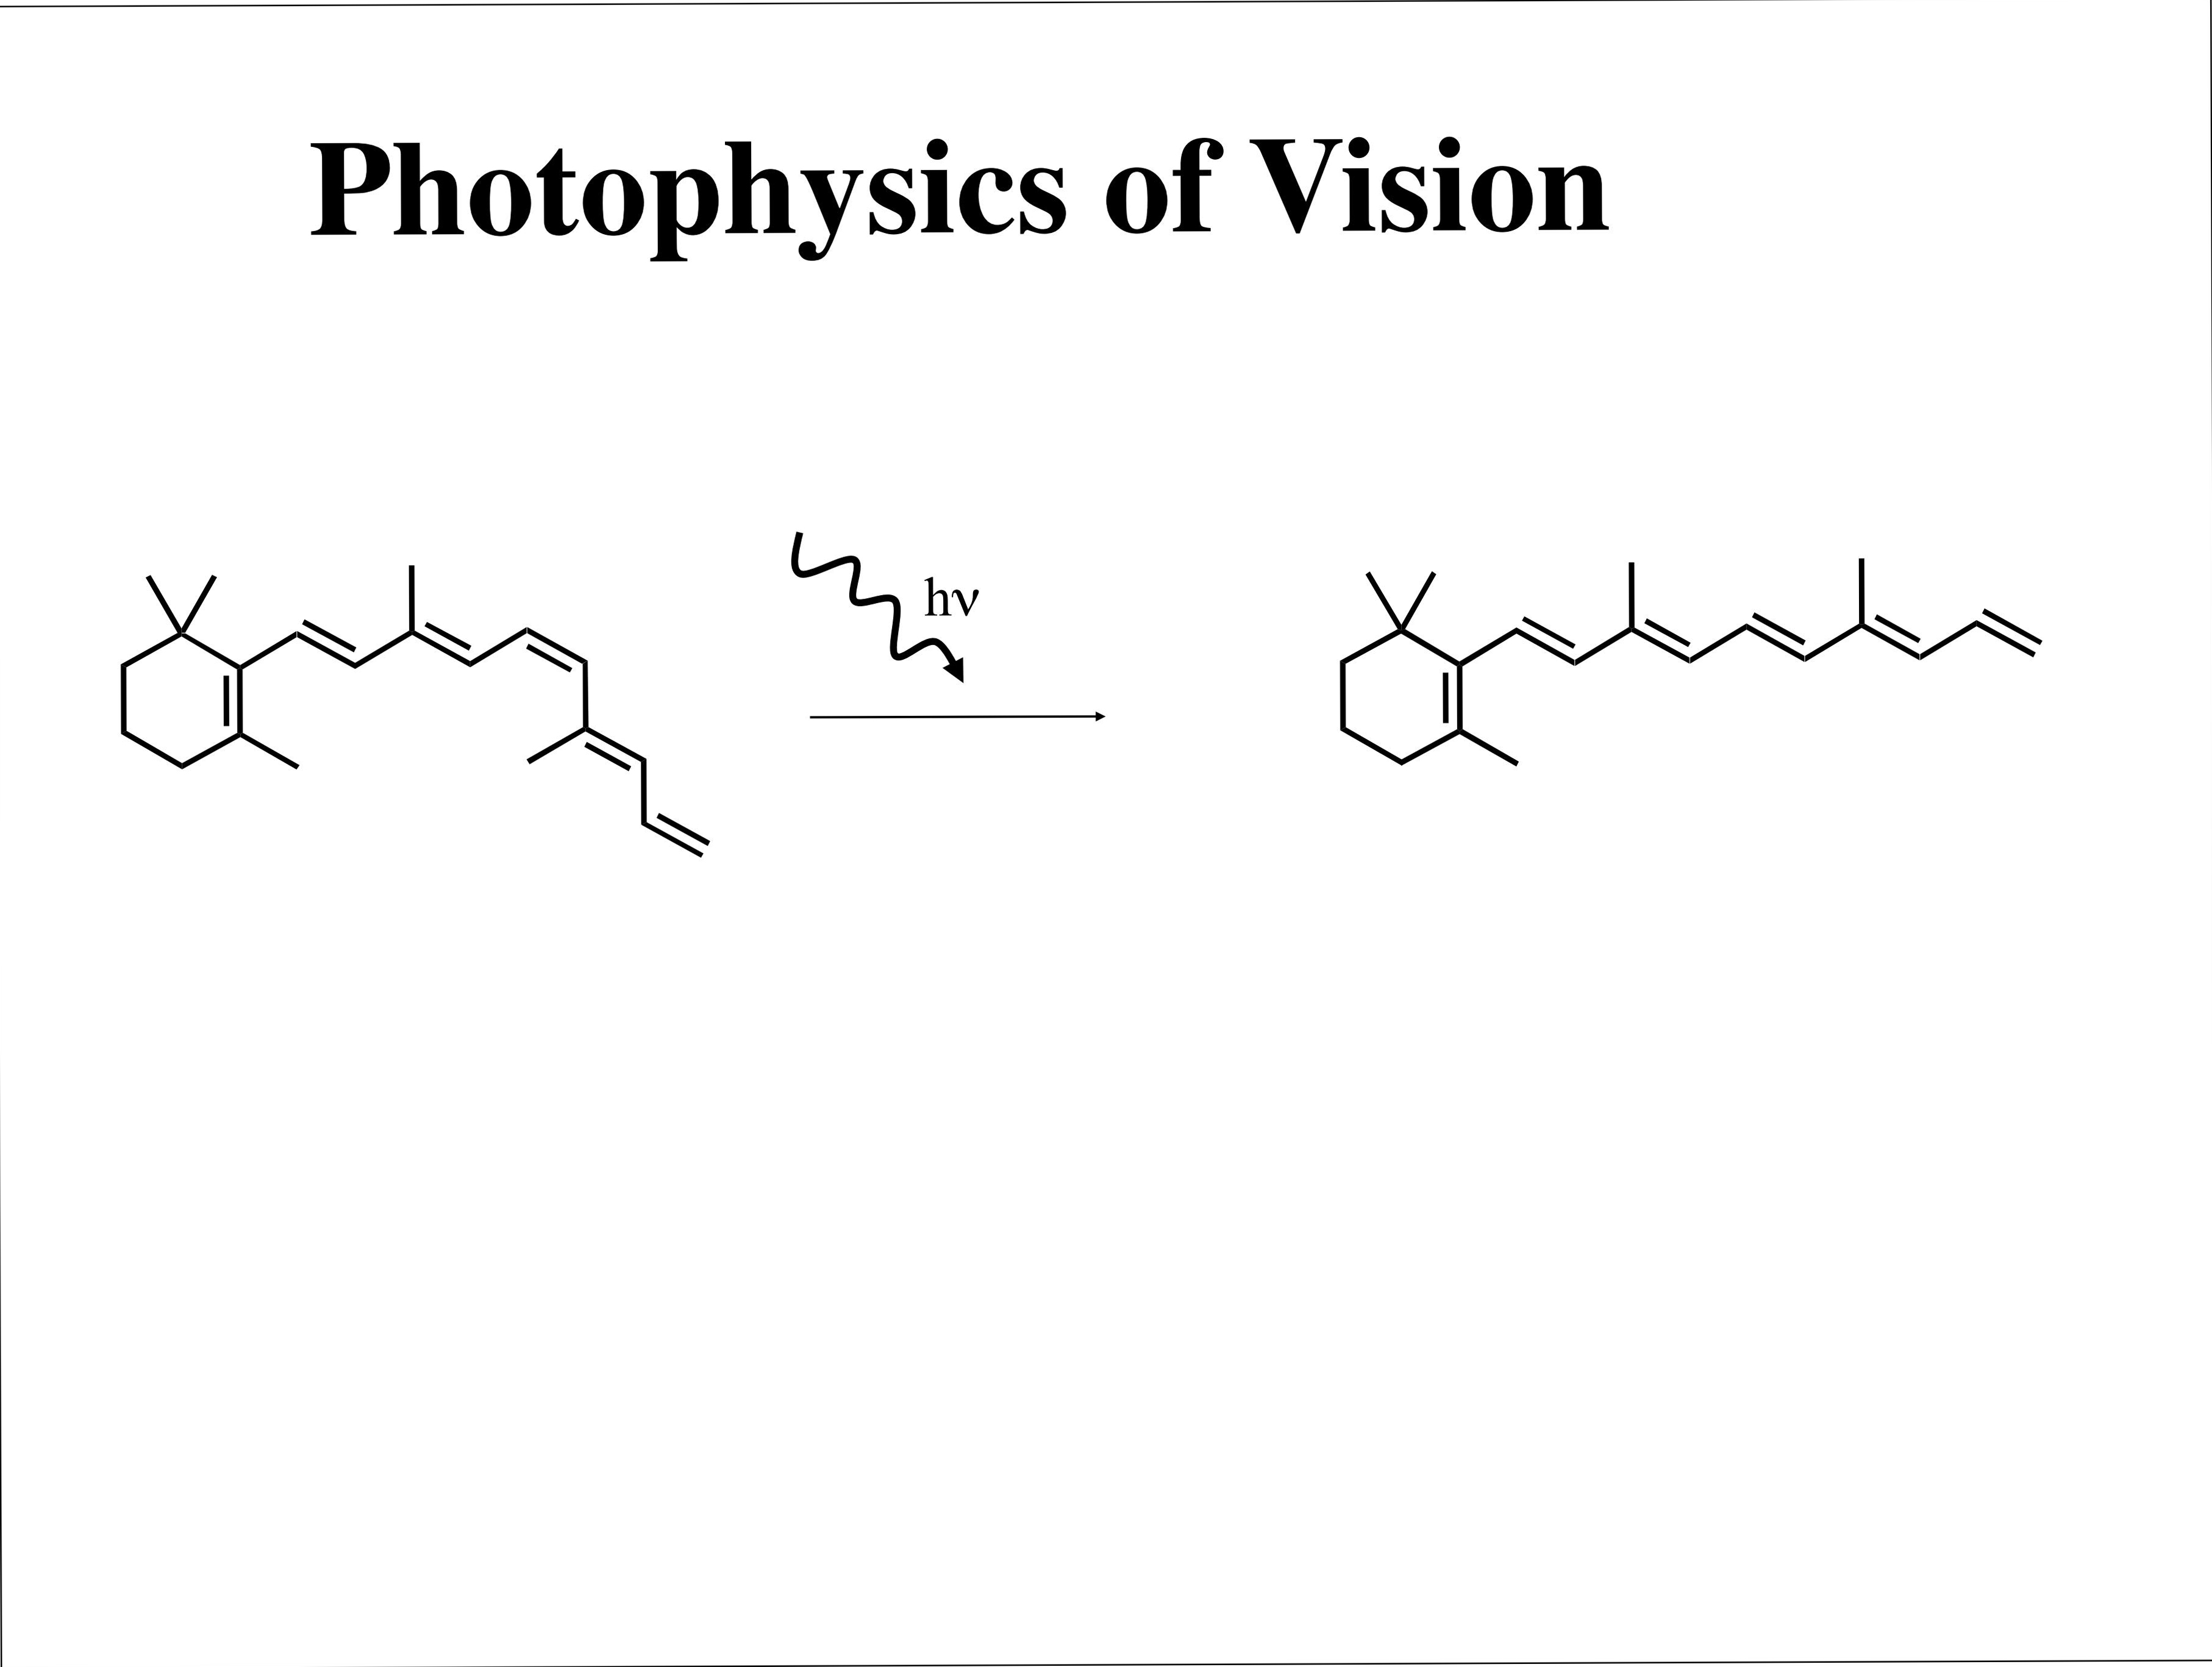 Photophysics of Vision